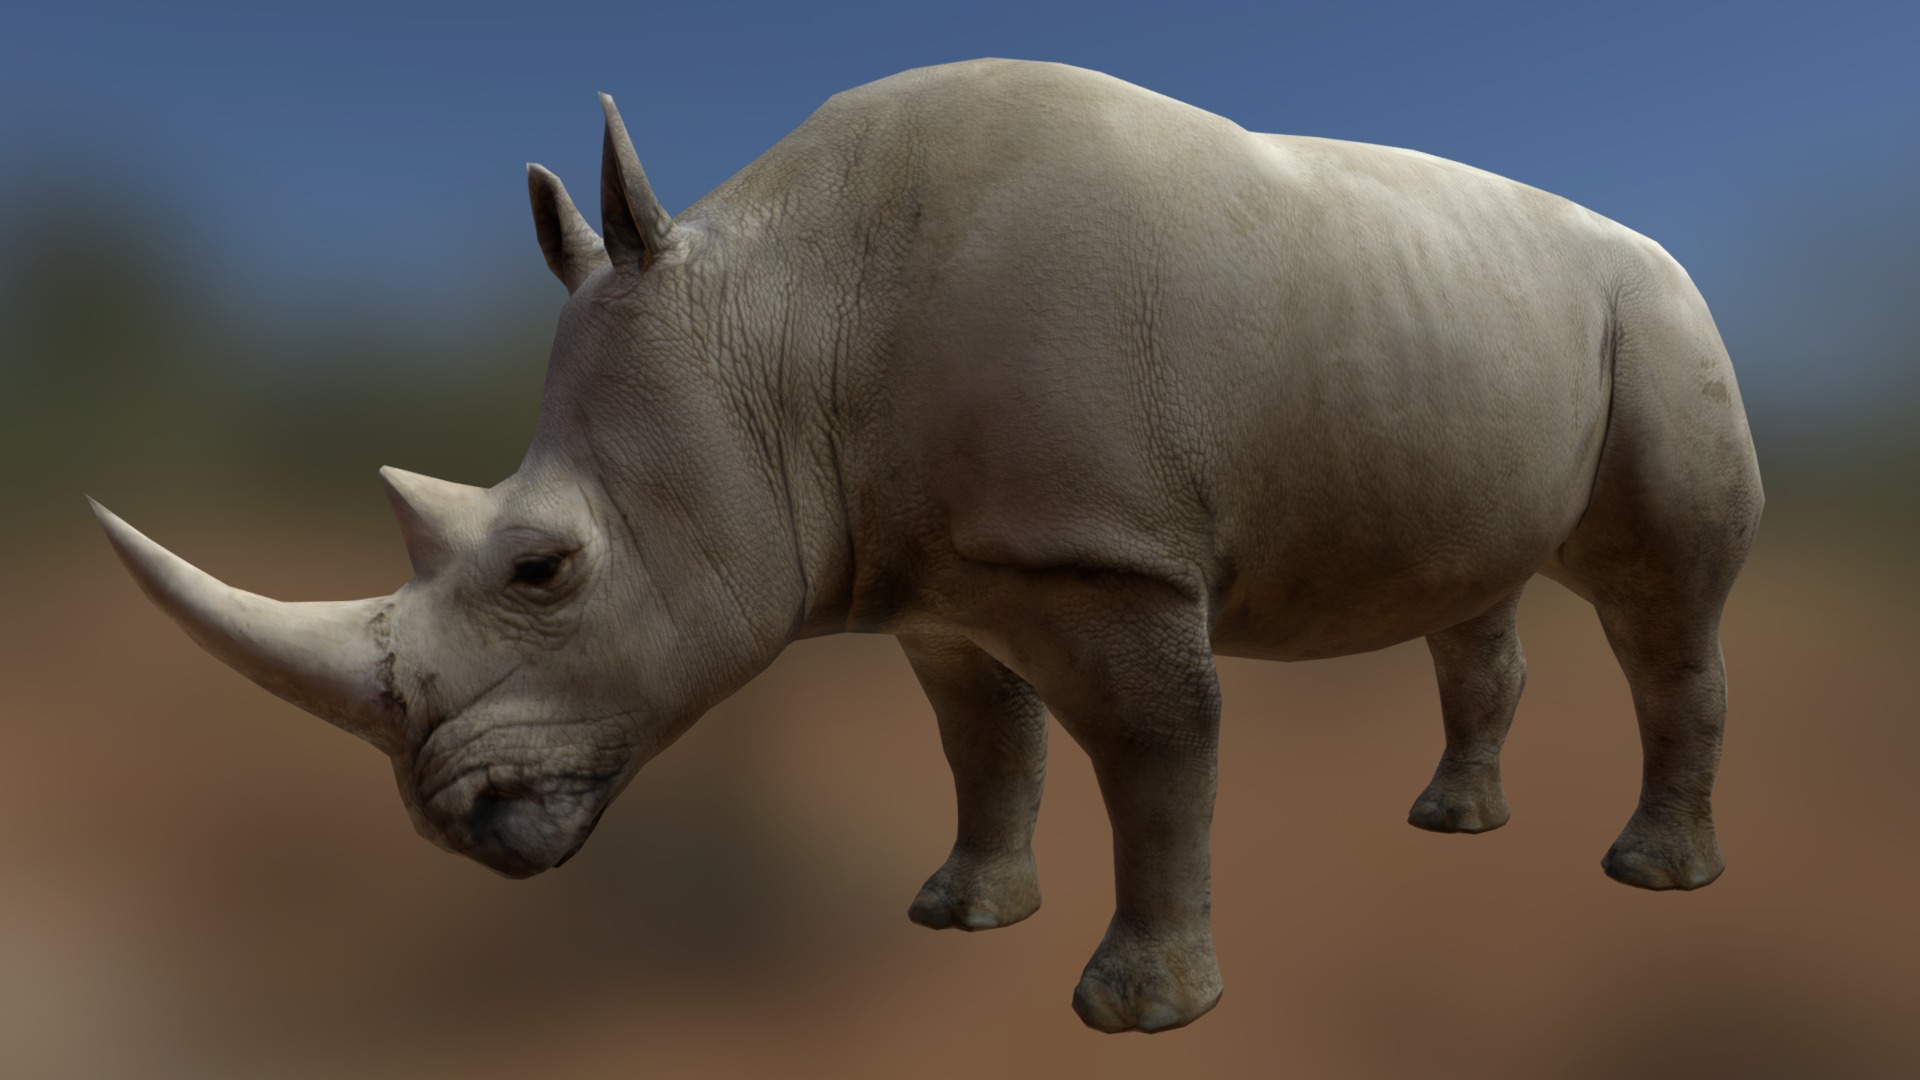 3D model Rhino (old) - This is a 3D model of the Rhino (old). The 3D model is about a rhinoceros walking on a dirt road.